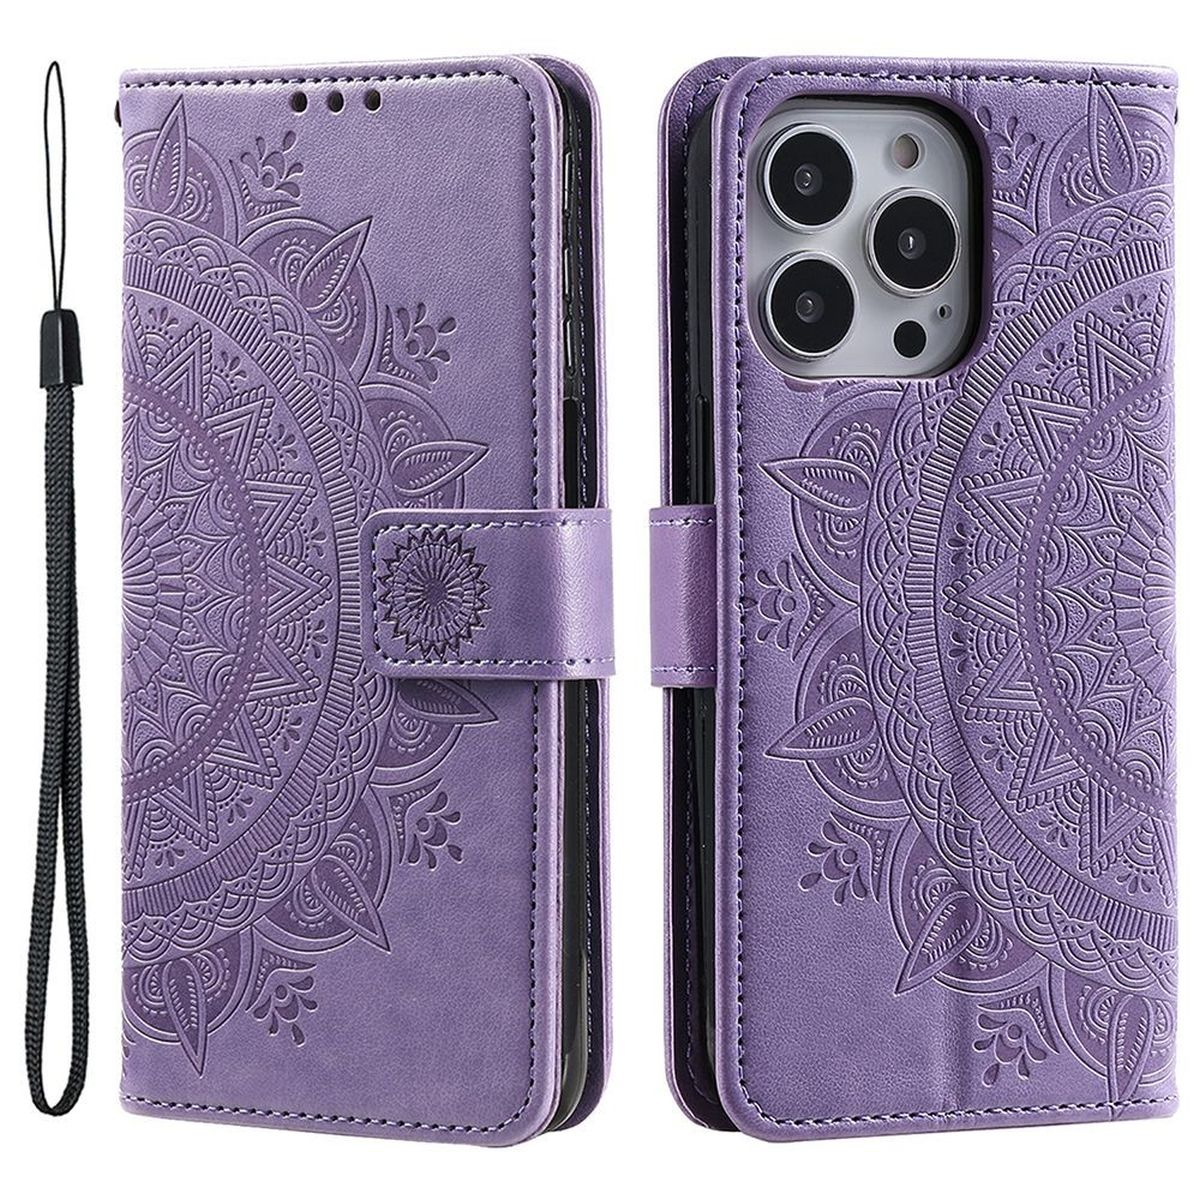 Mandala Max, Apple, COVERKINGZ Pro Bookcover, Klapphülle Lila 14 iPhone mit Muster,